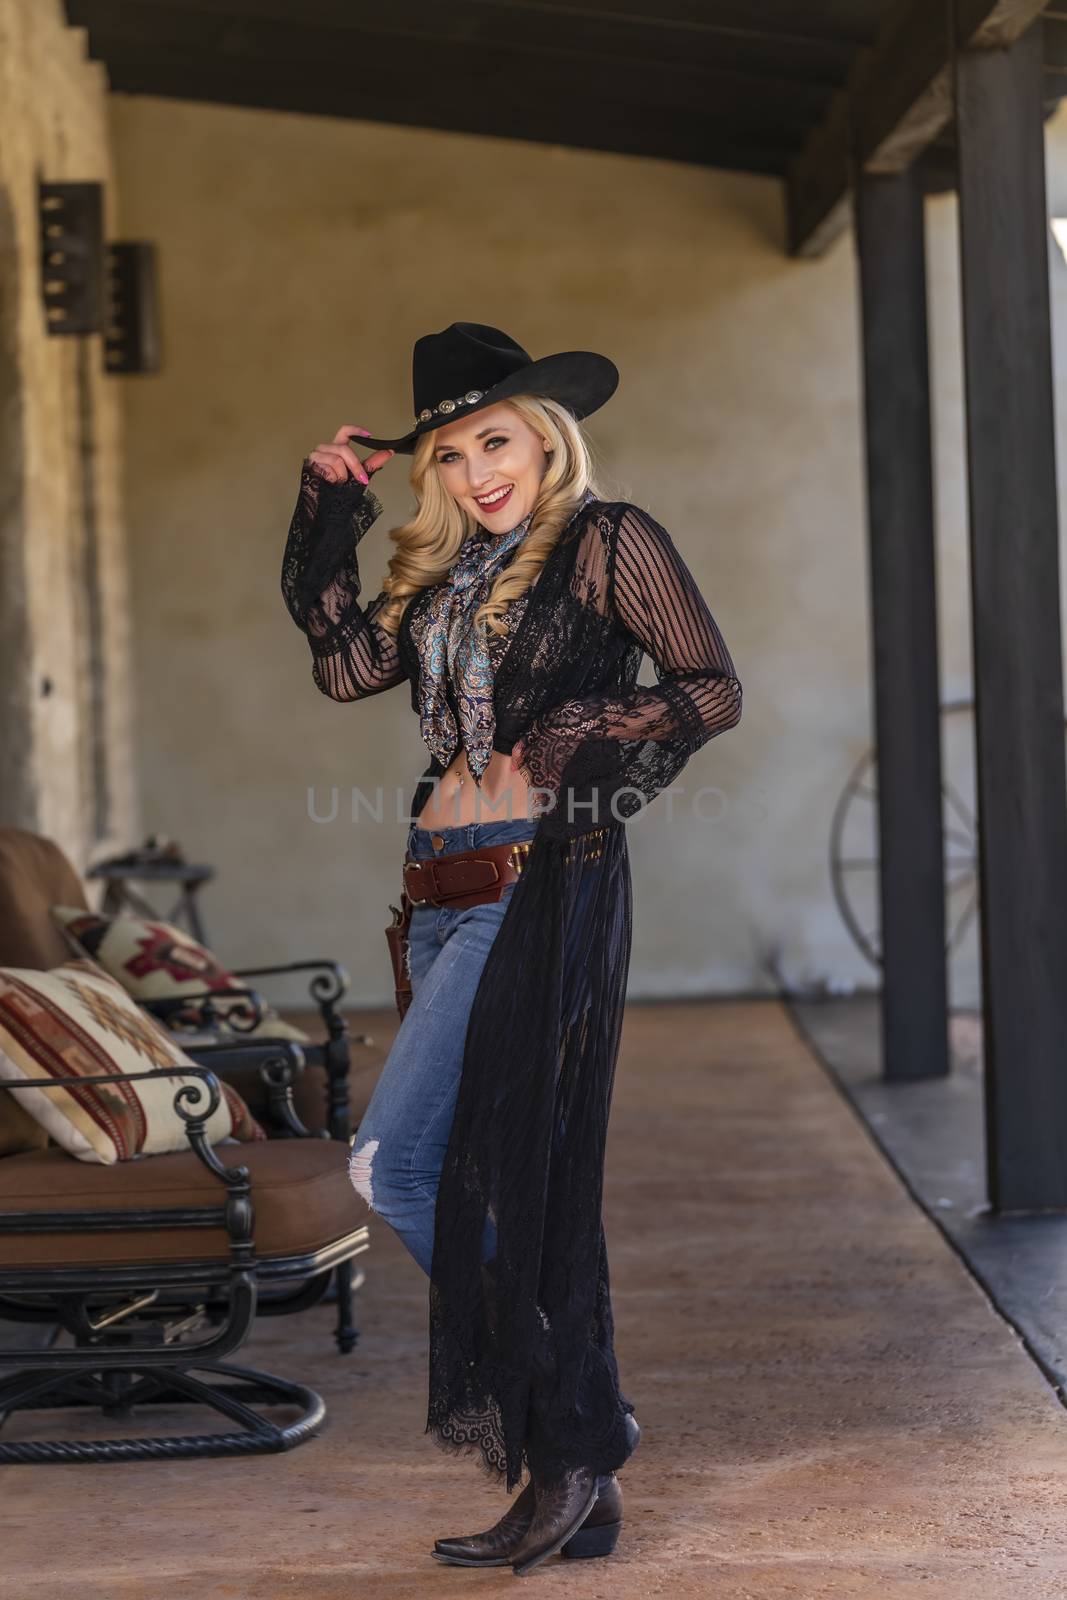 A gorgeous blonde model dressed as a cowgirl enjoying the outdoor weather